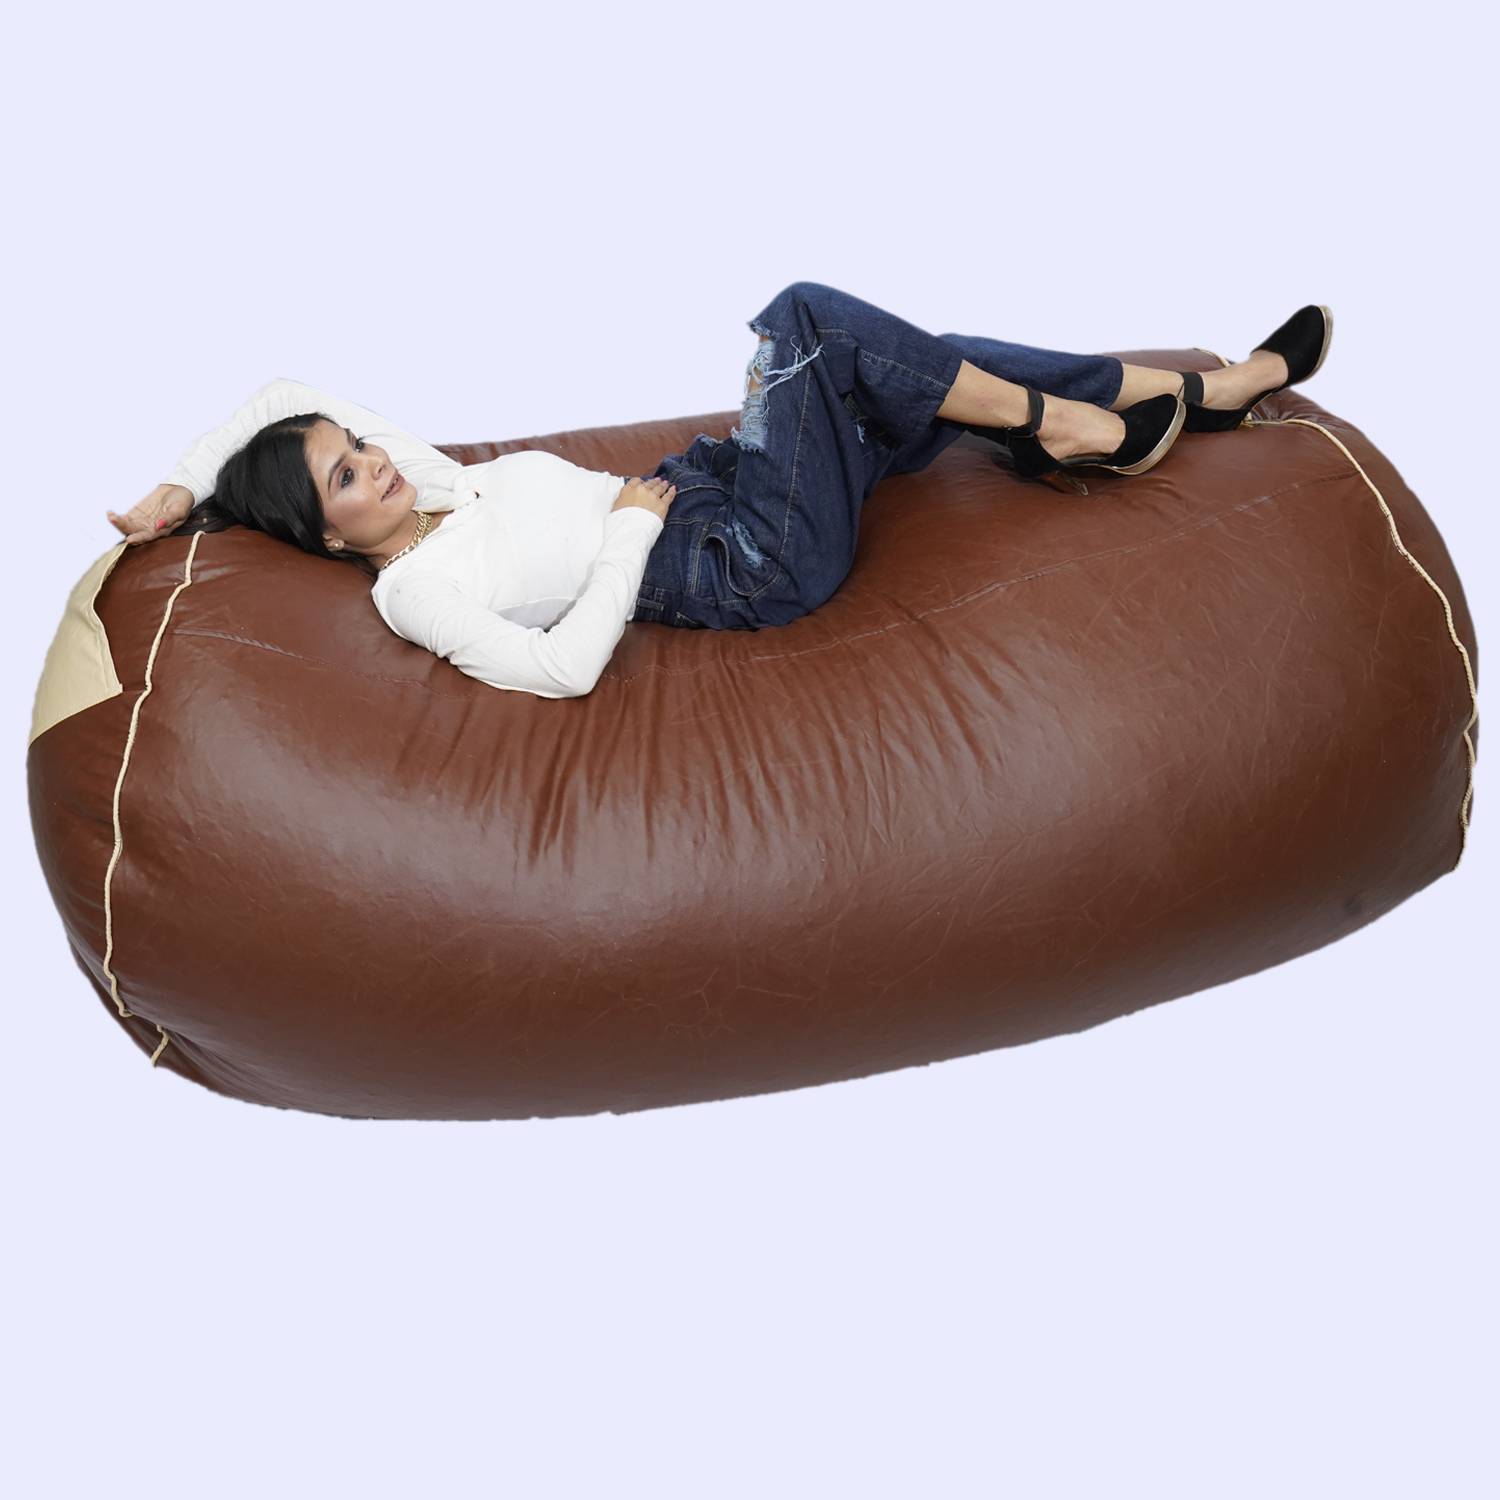 Vplanet Most Comfortable Bean Bag Made With Durable Lama Leather Unfilled  (Black) - Xl,Xxl,Xxl at Rs 2100/piece | Bean Bag in Ghaziabad | ID:  26118472455